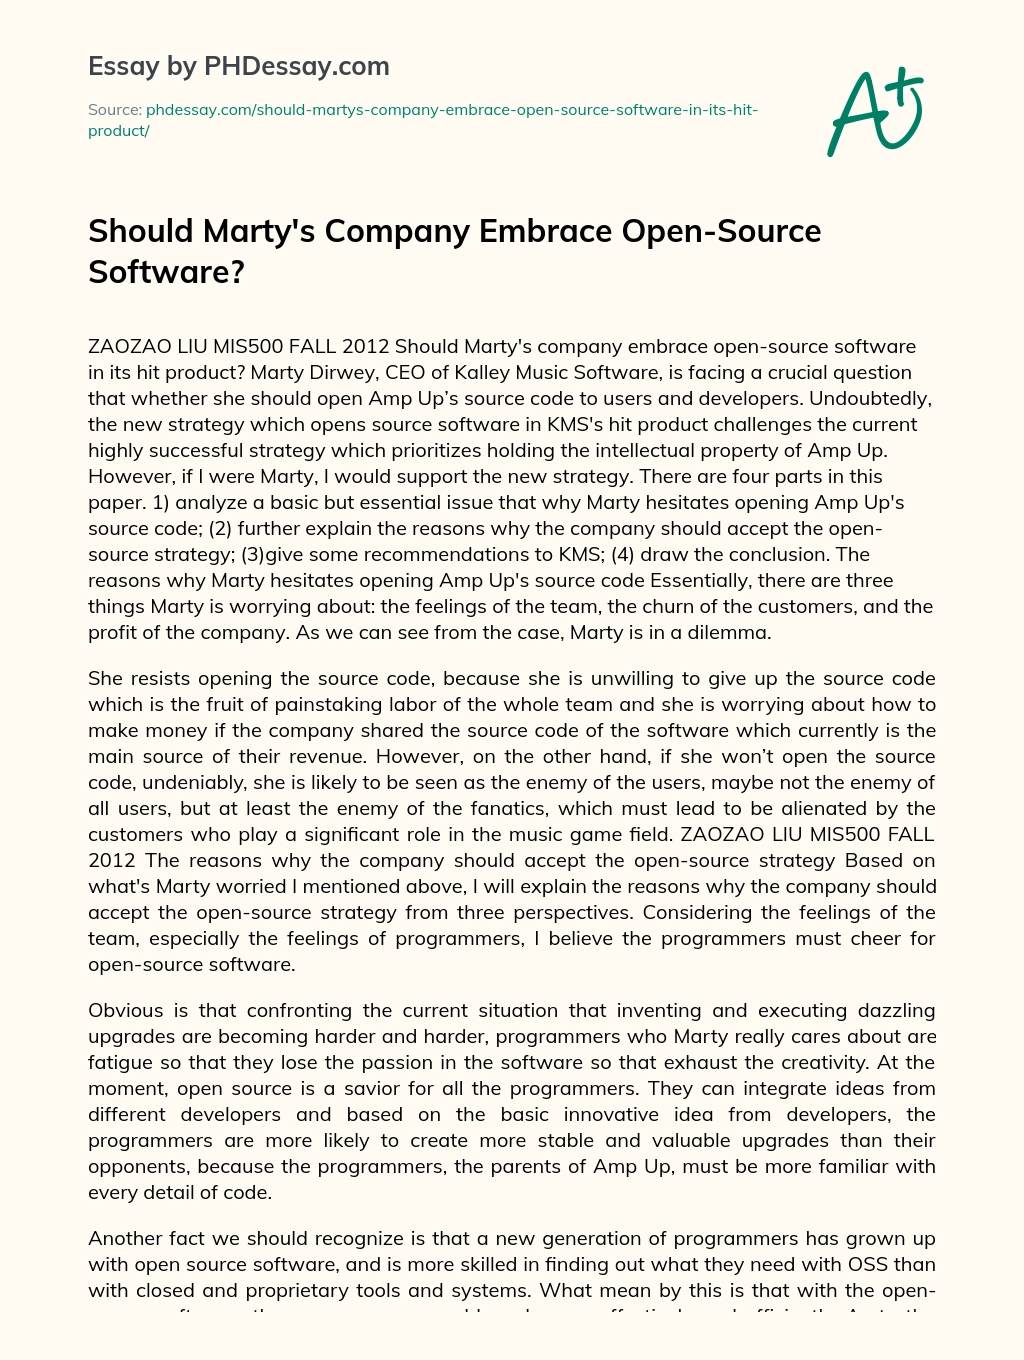 Should Marty’s Company Embrace Open-Source Software? essay